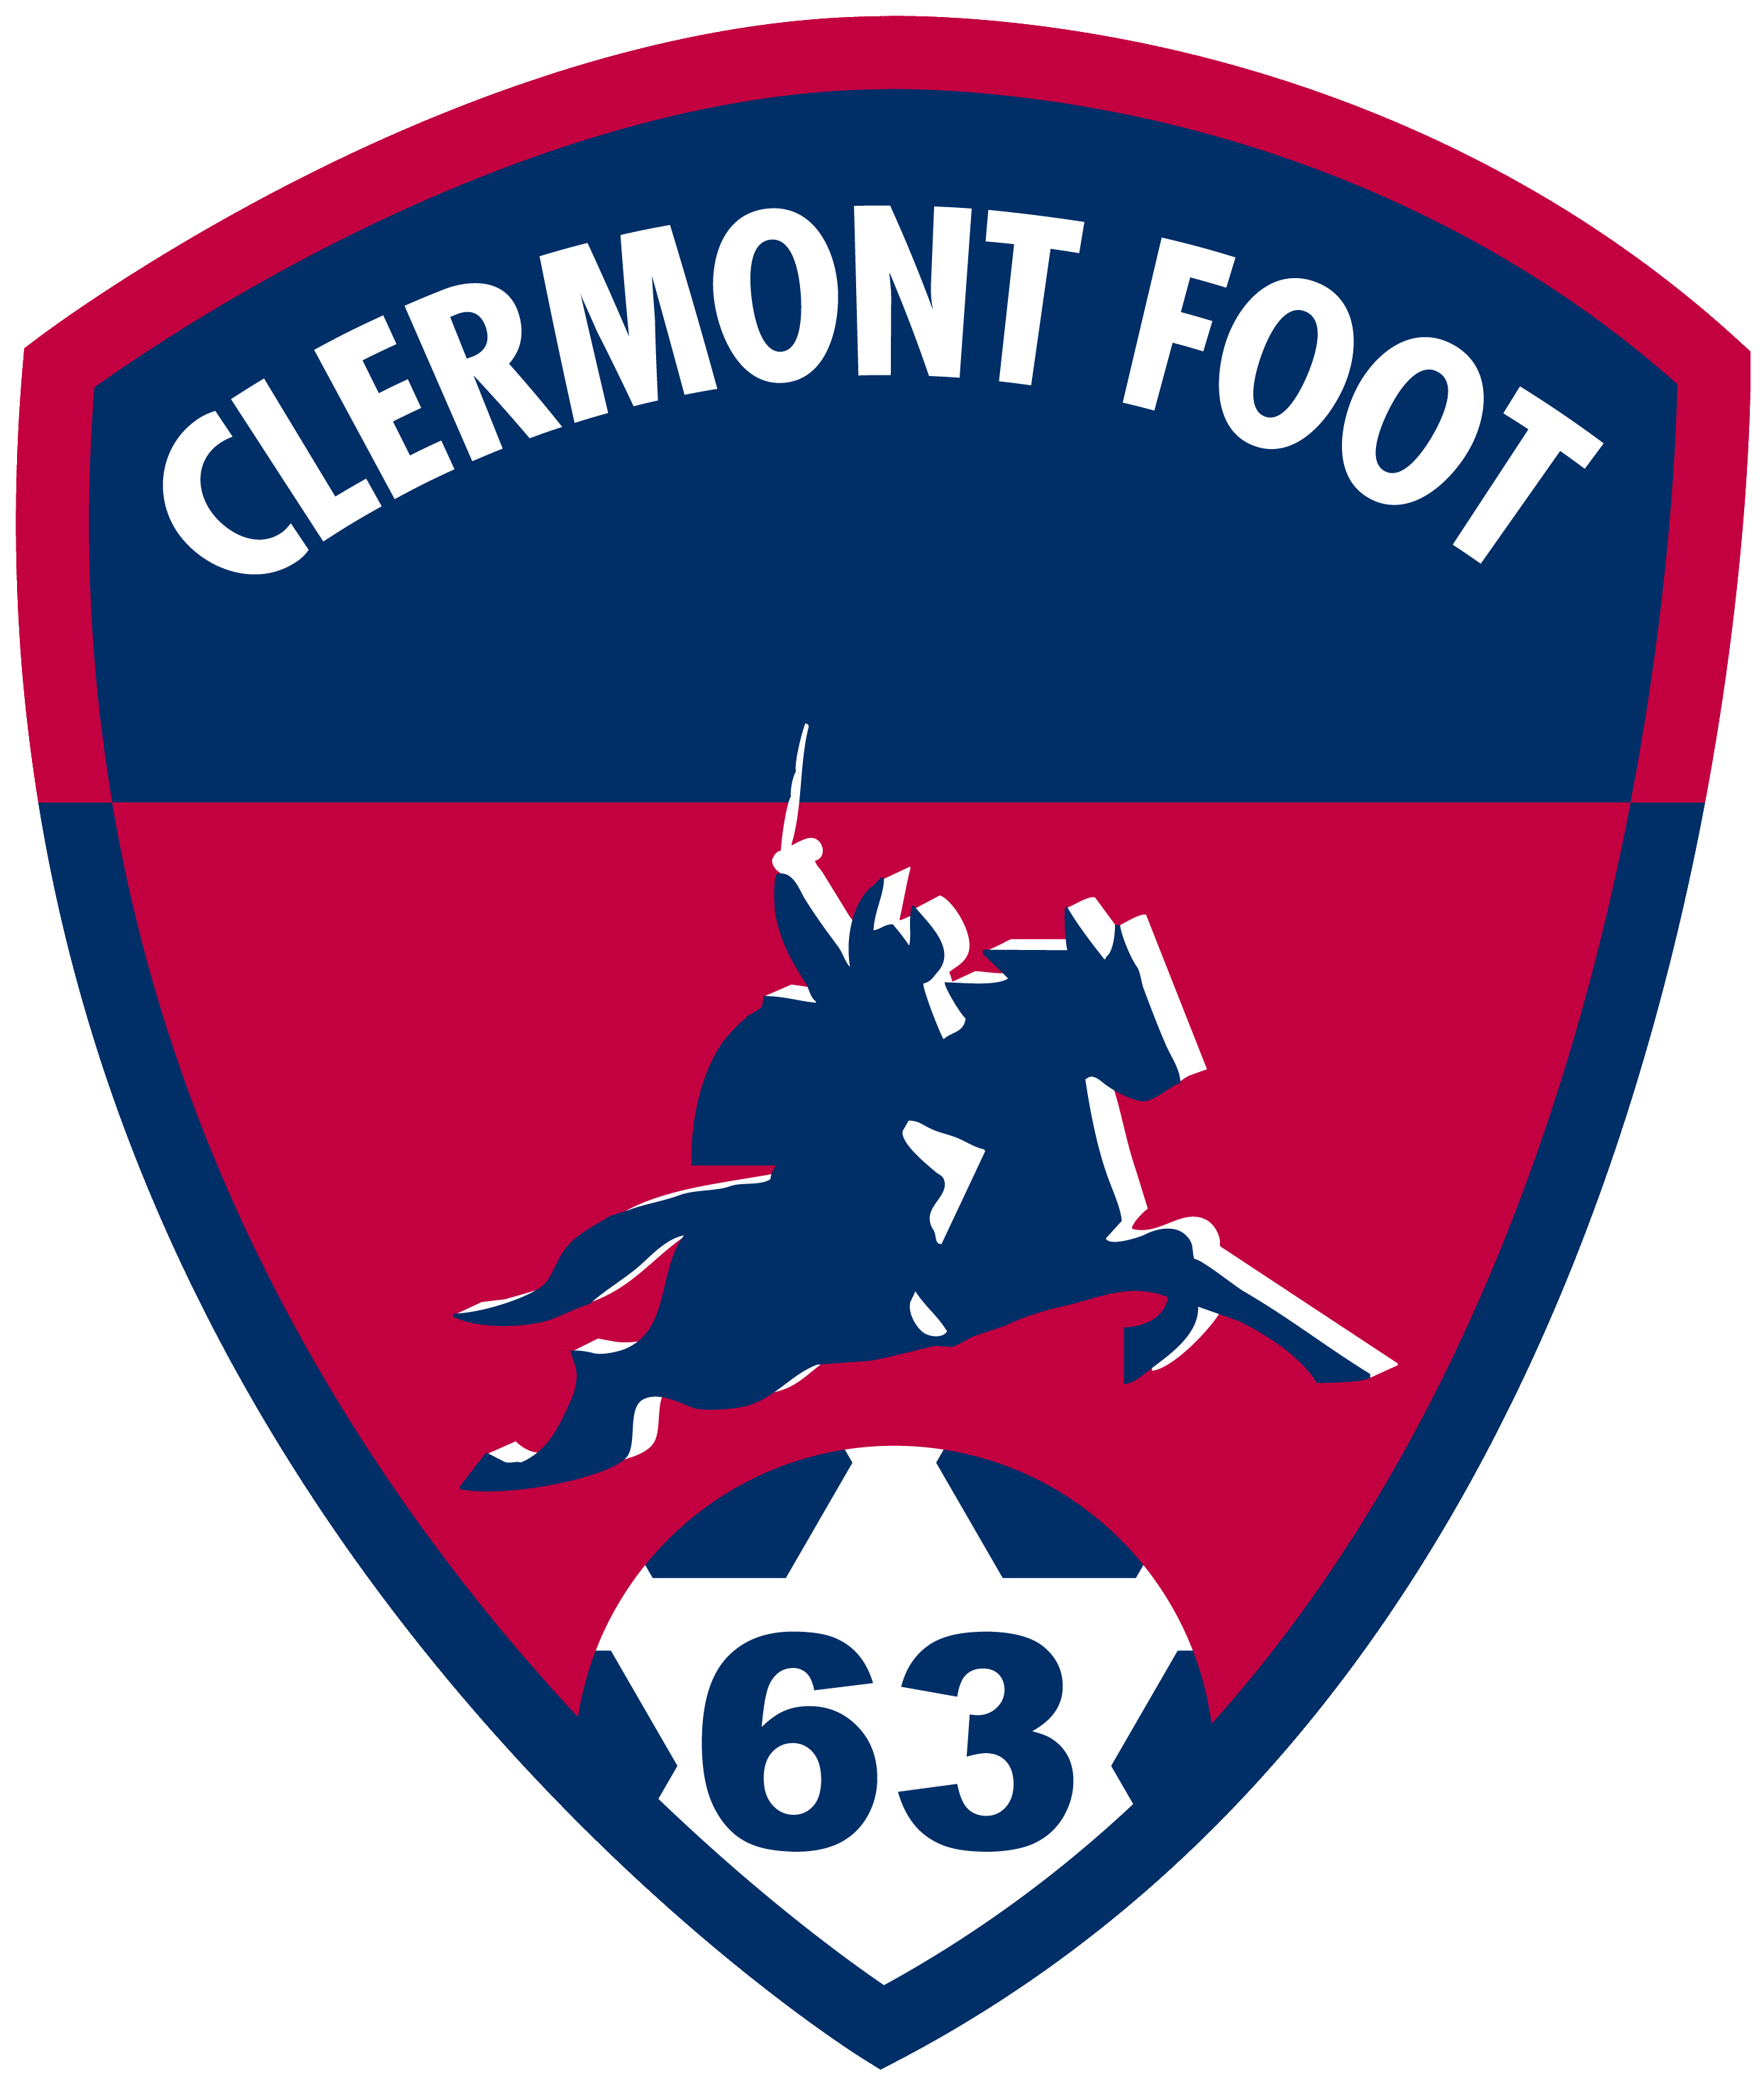 Clermont Foot vs Strasbourg: The home team are no match for the visitors